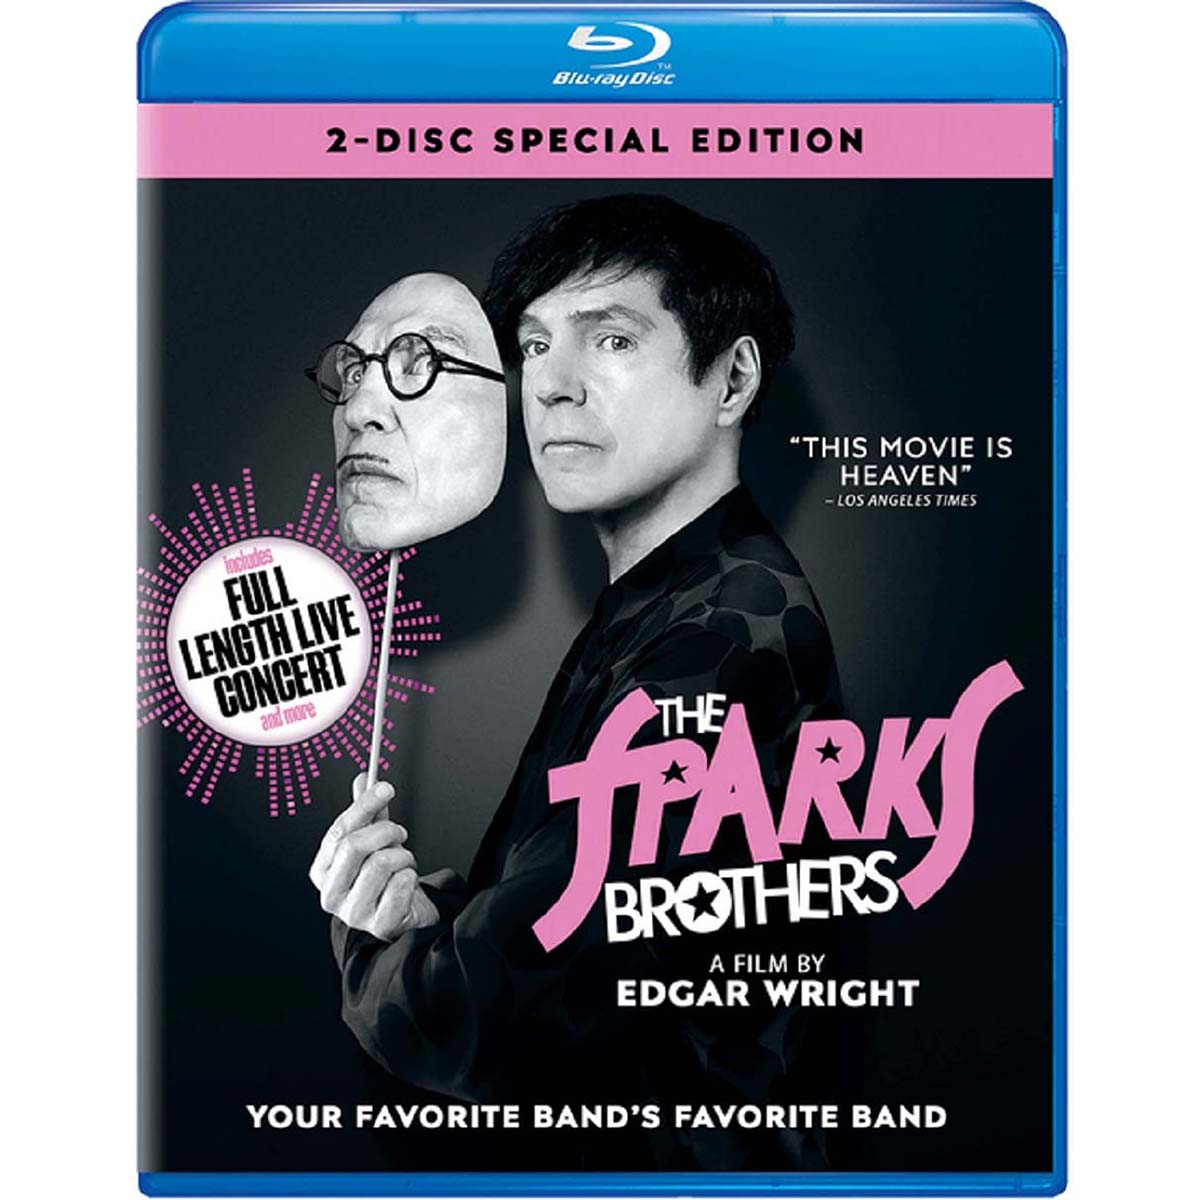 Sparks - The Sparks Brothers (BluRay)